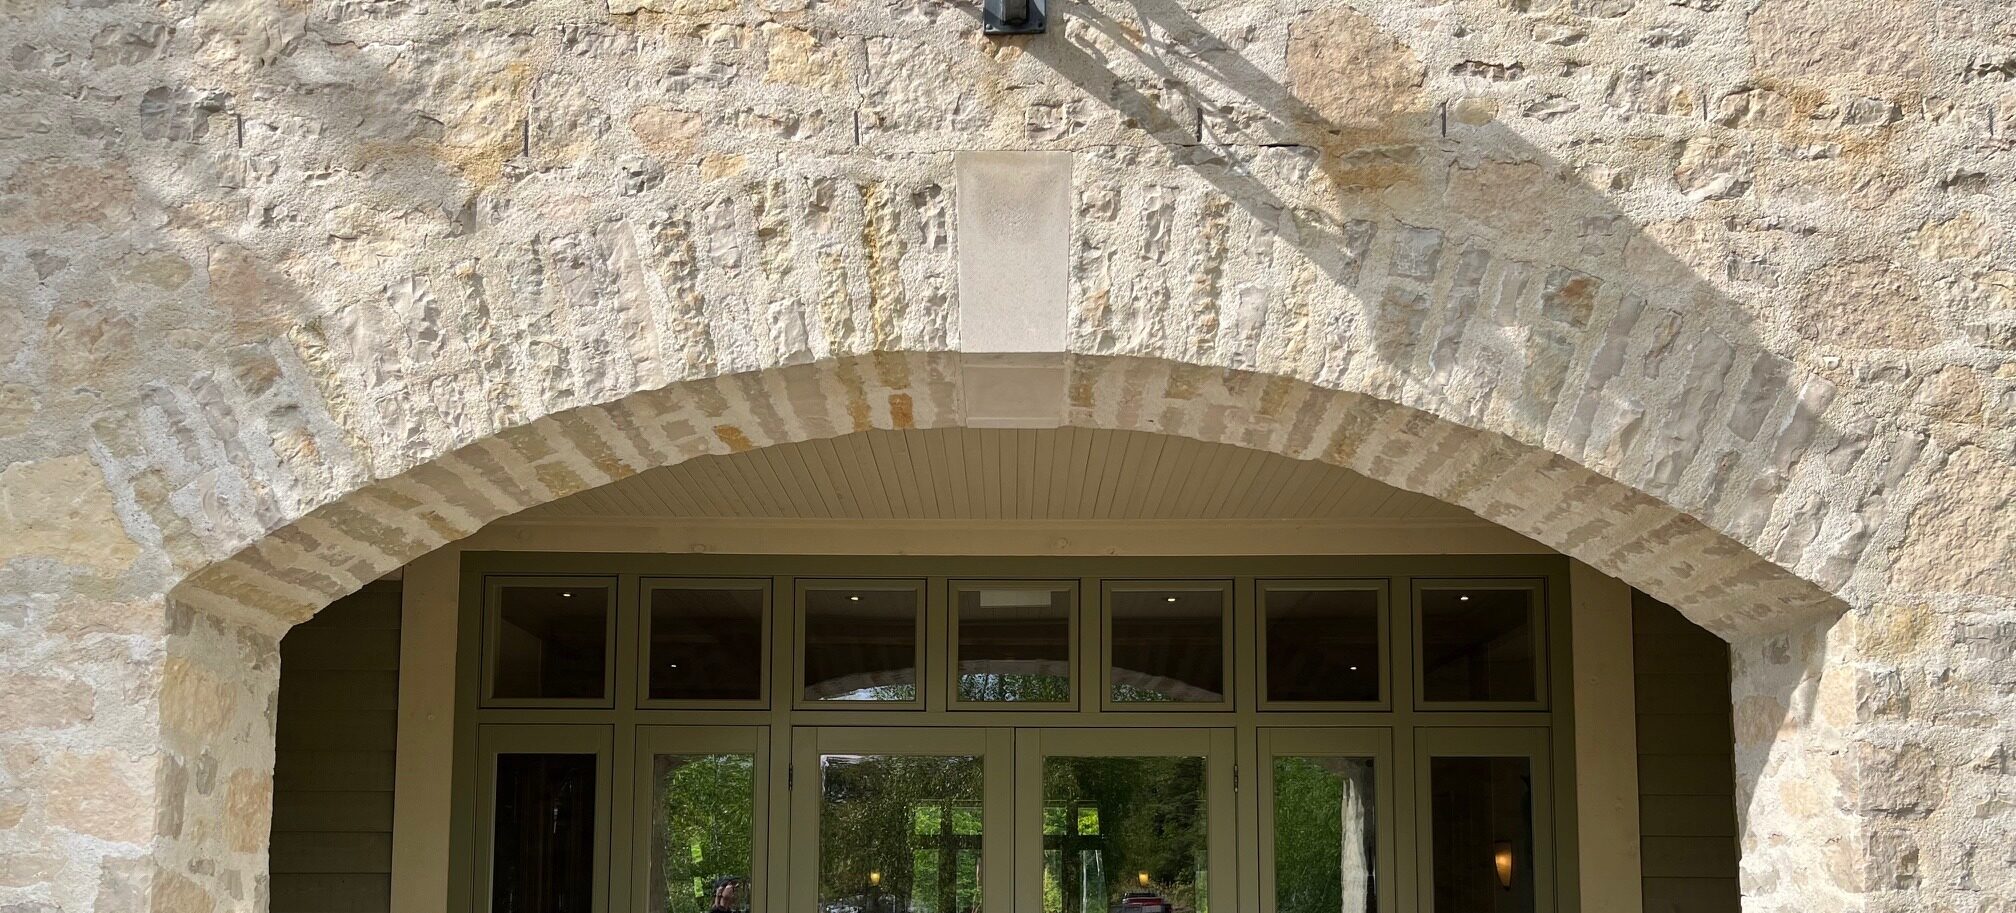 This image shows a stone archway above a set of modern glass doors, with sunlight casting shadows, creating a blend of historic and contemporary architectural styles.